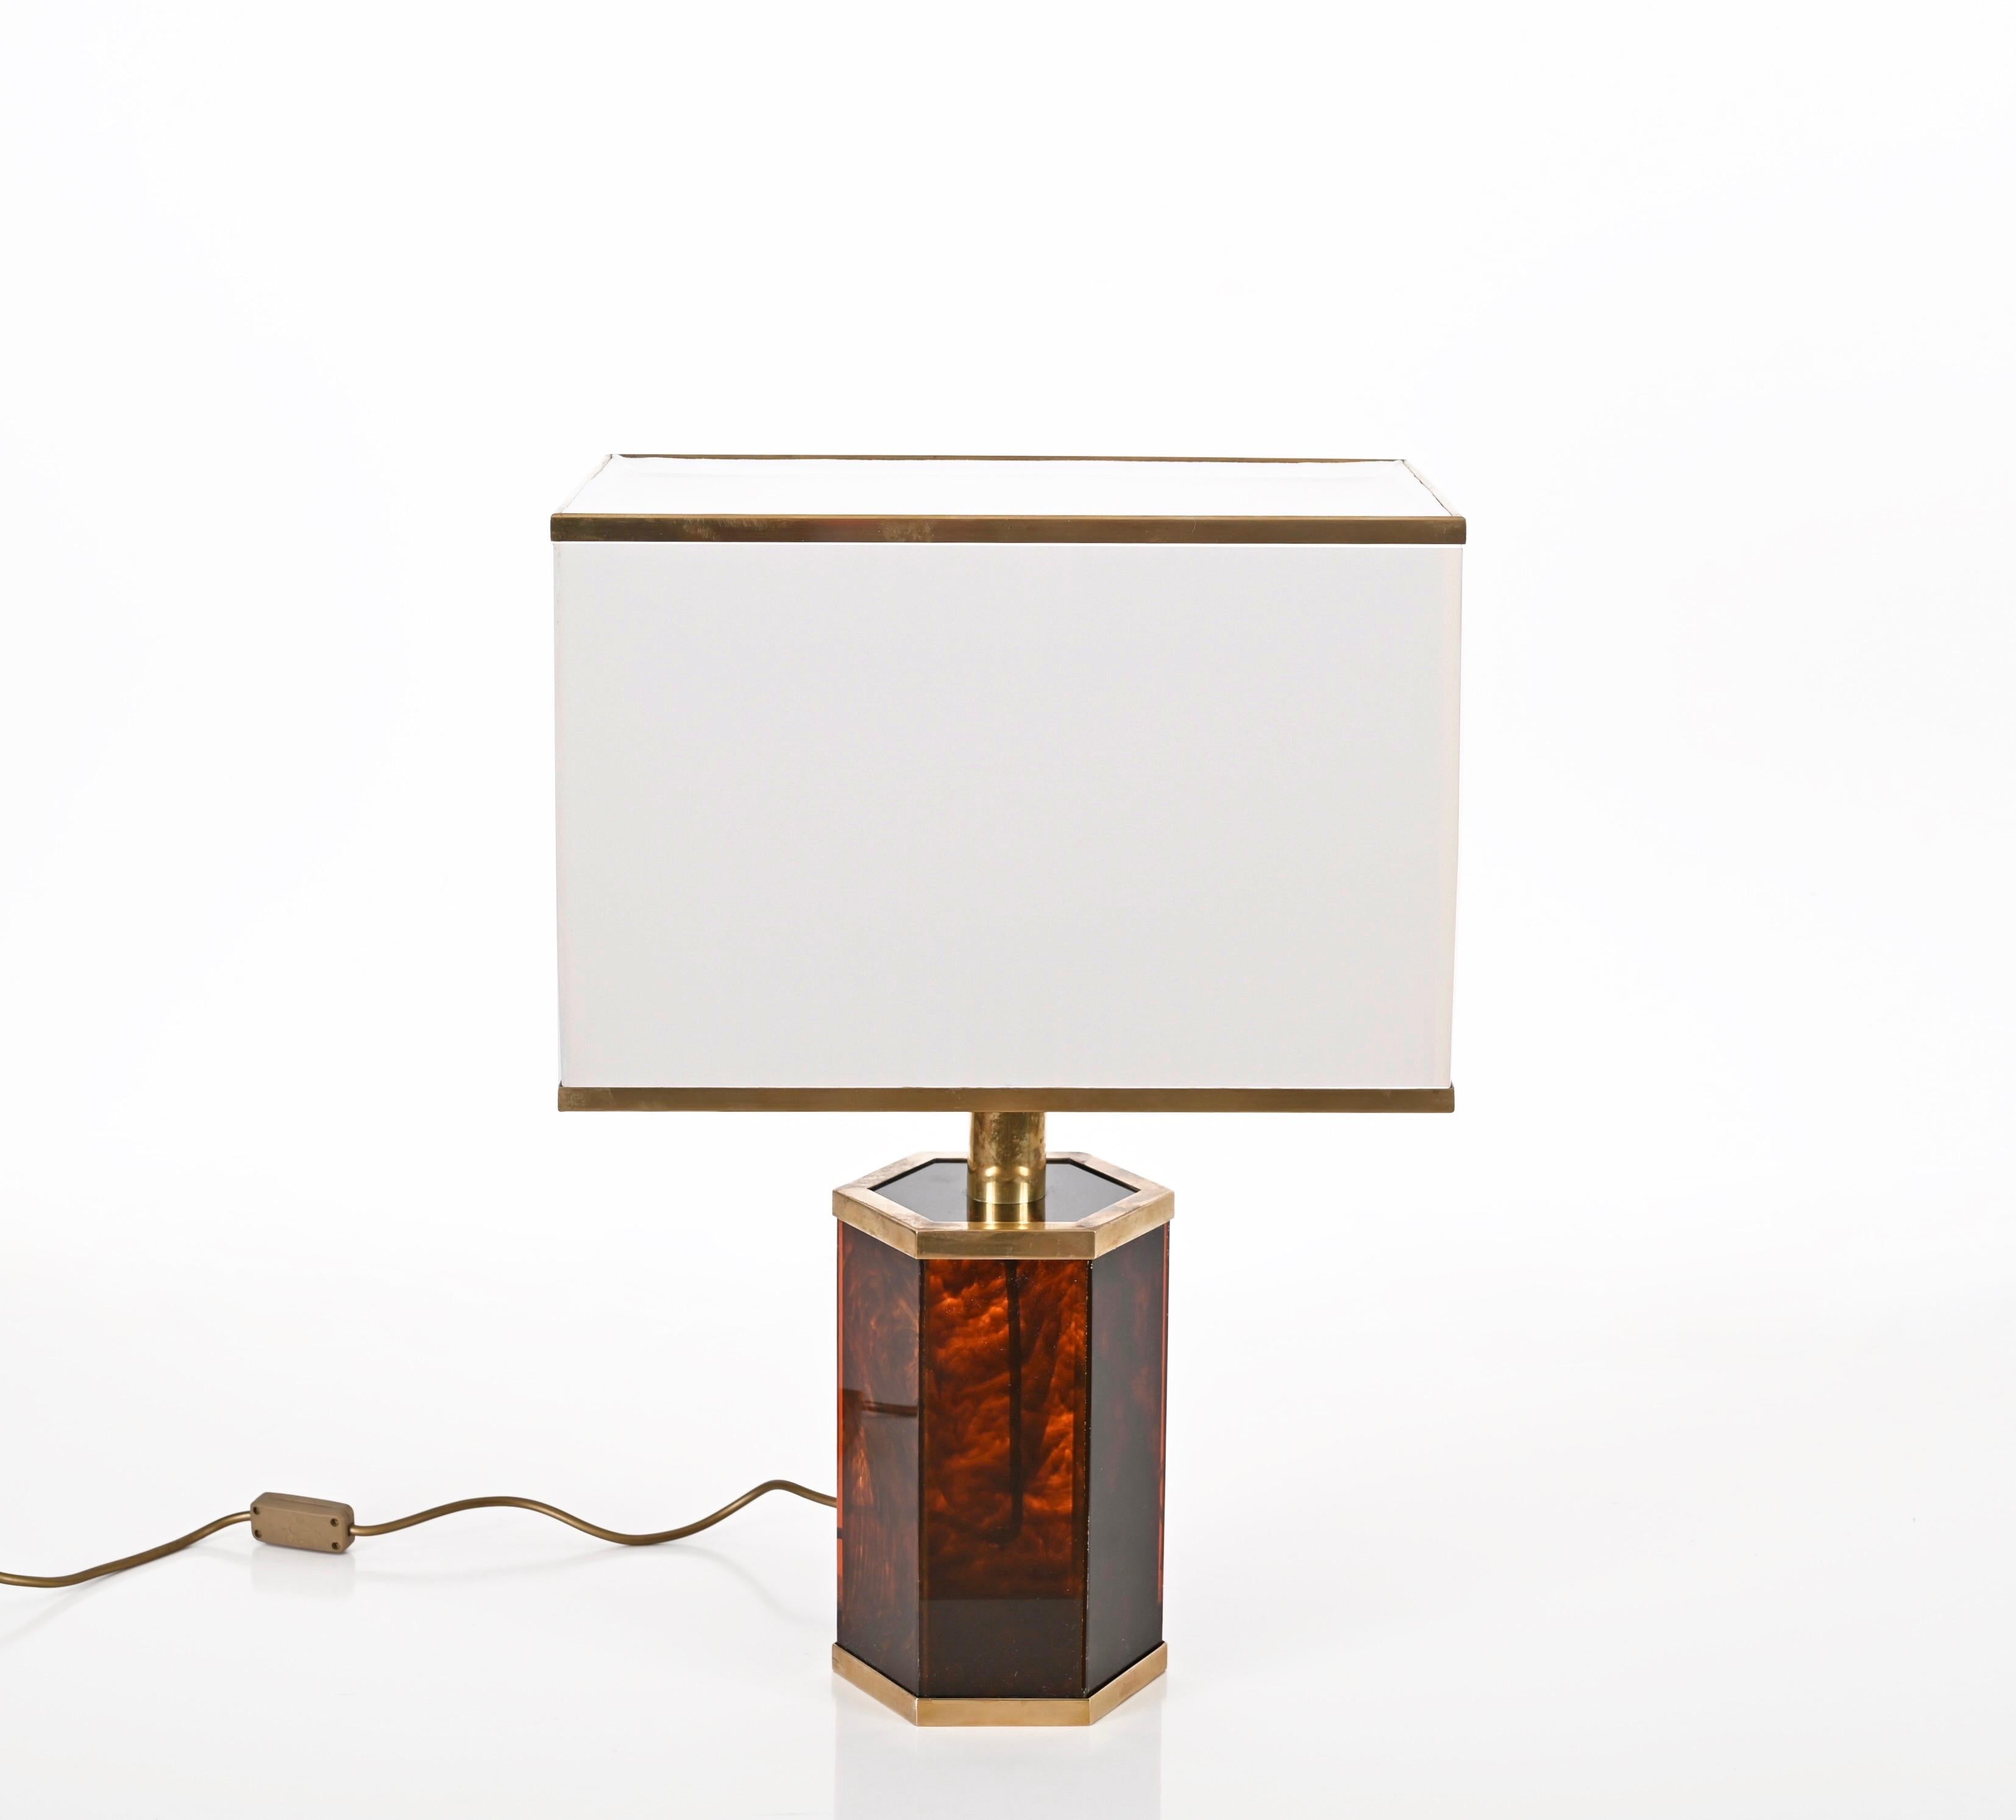 Willy Rizzo, Italian Table Lamp in Tortoiseshell Effect Lucite and Brass, 1970s For Sale 11